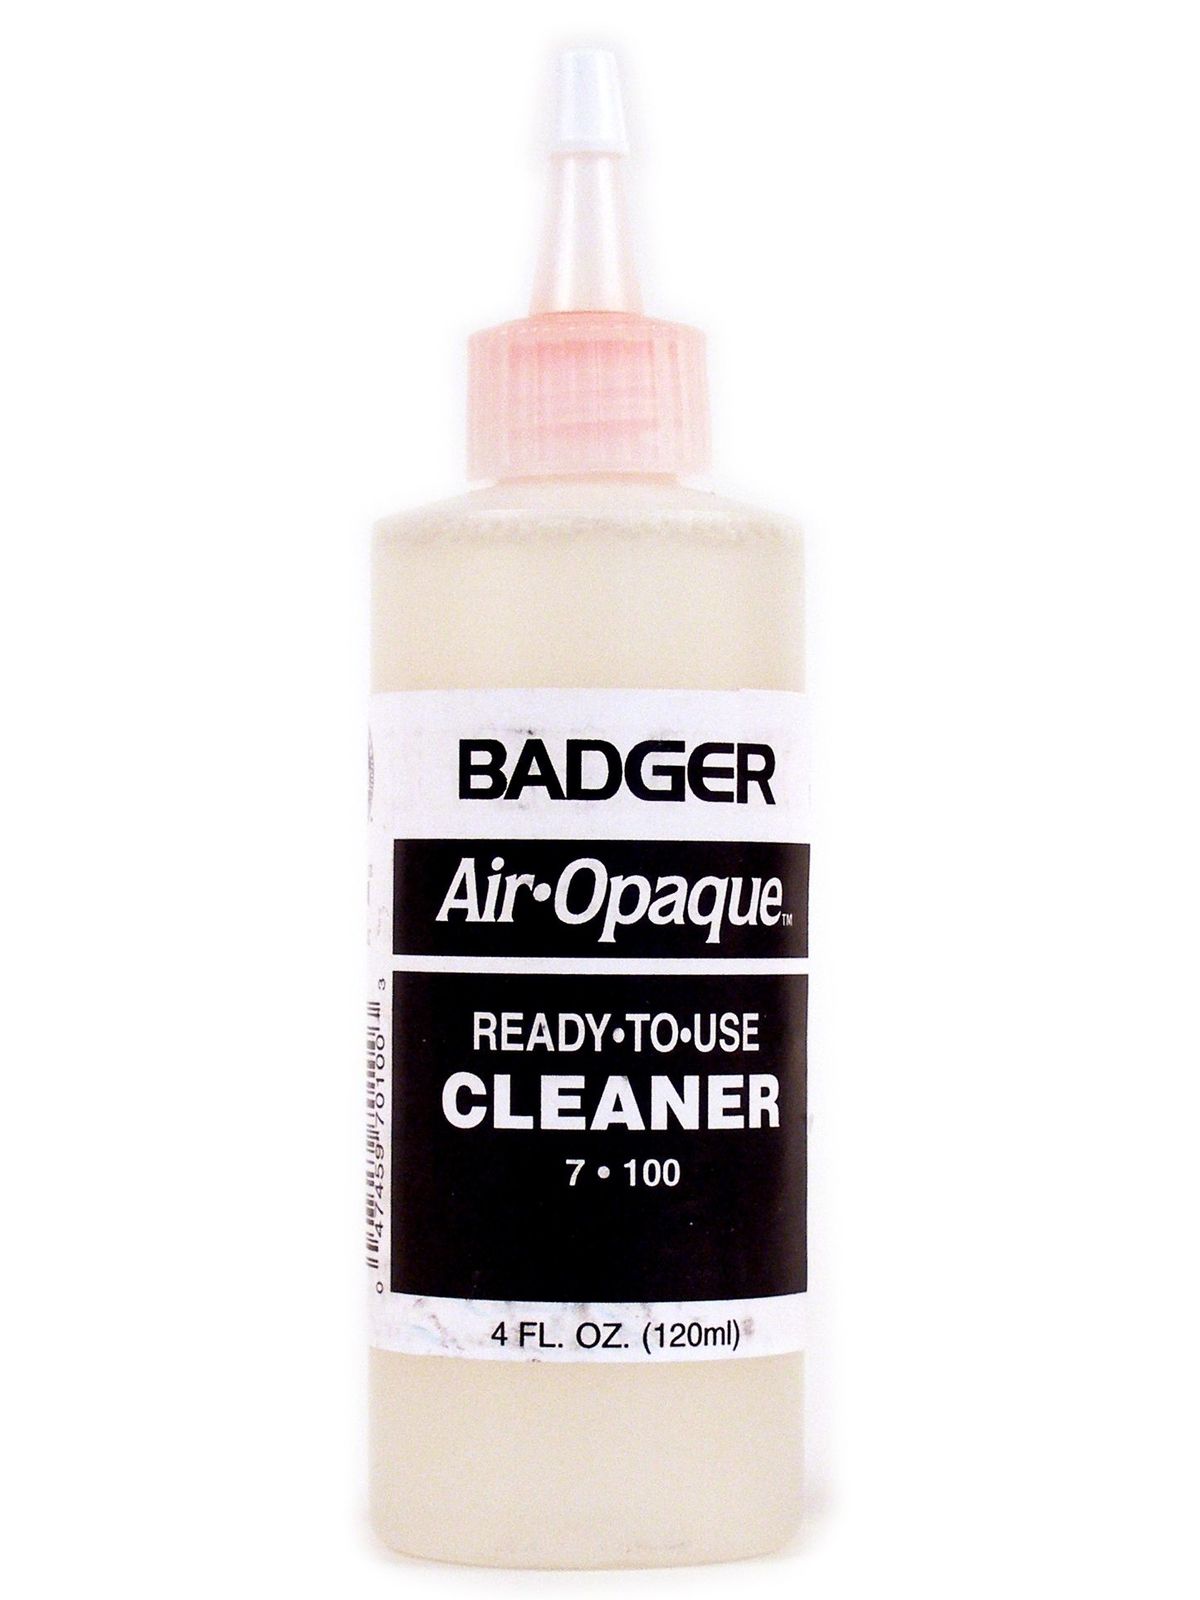 Badger Air-Opaque Cleaner